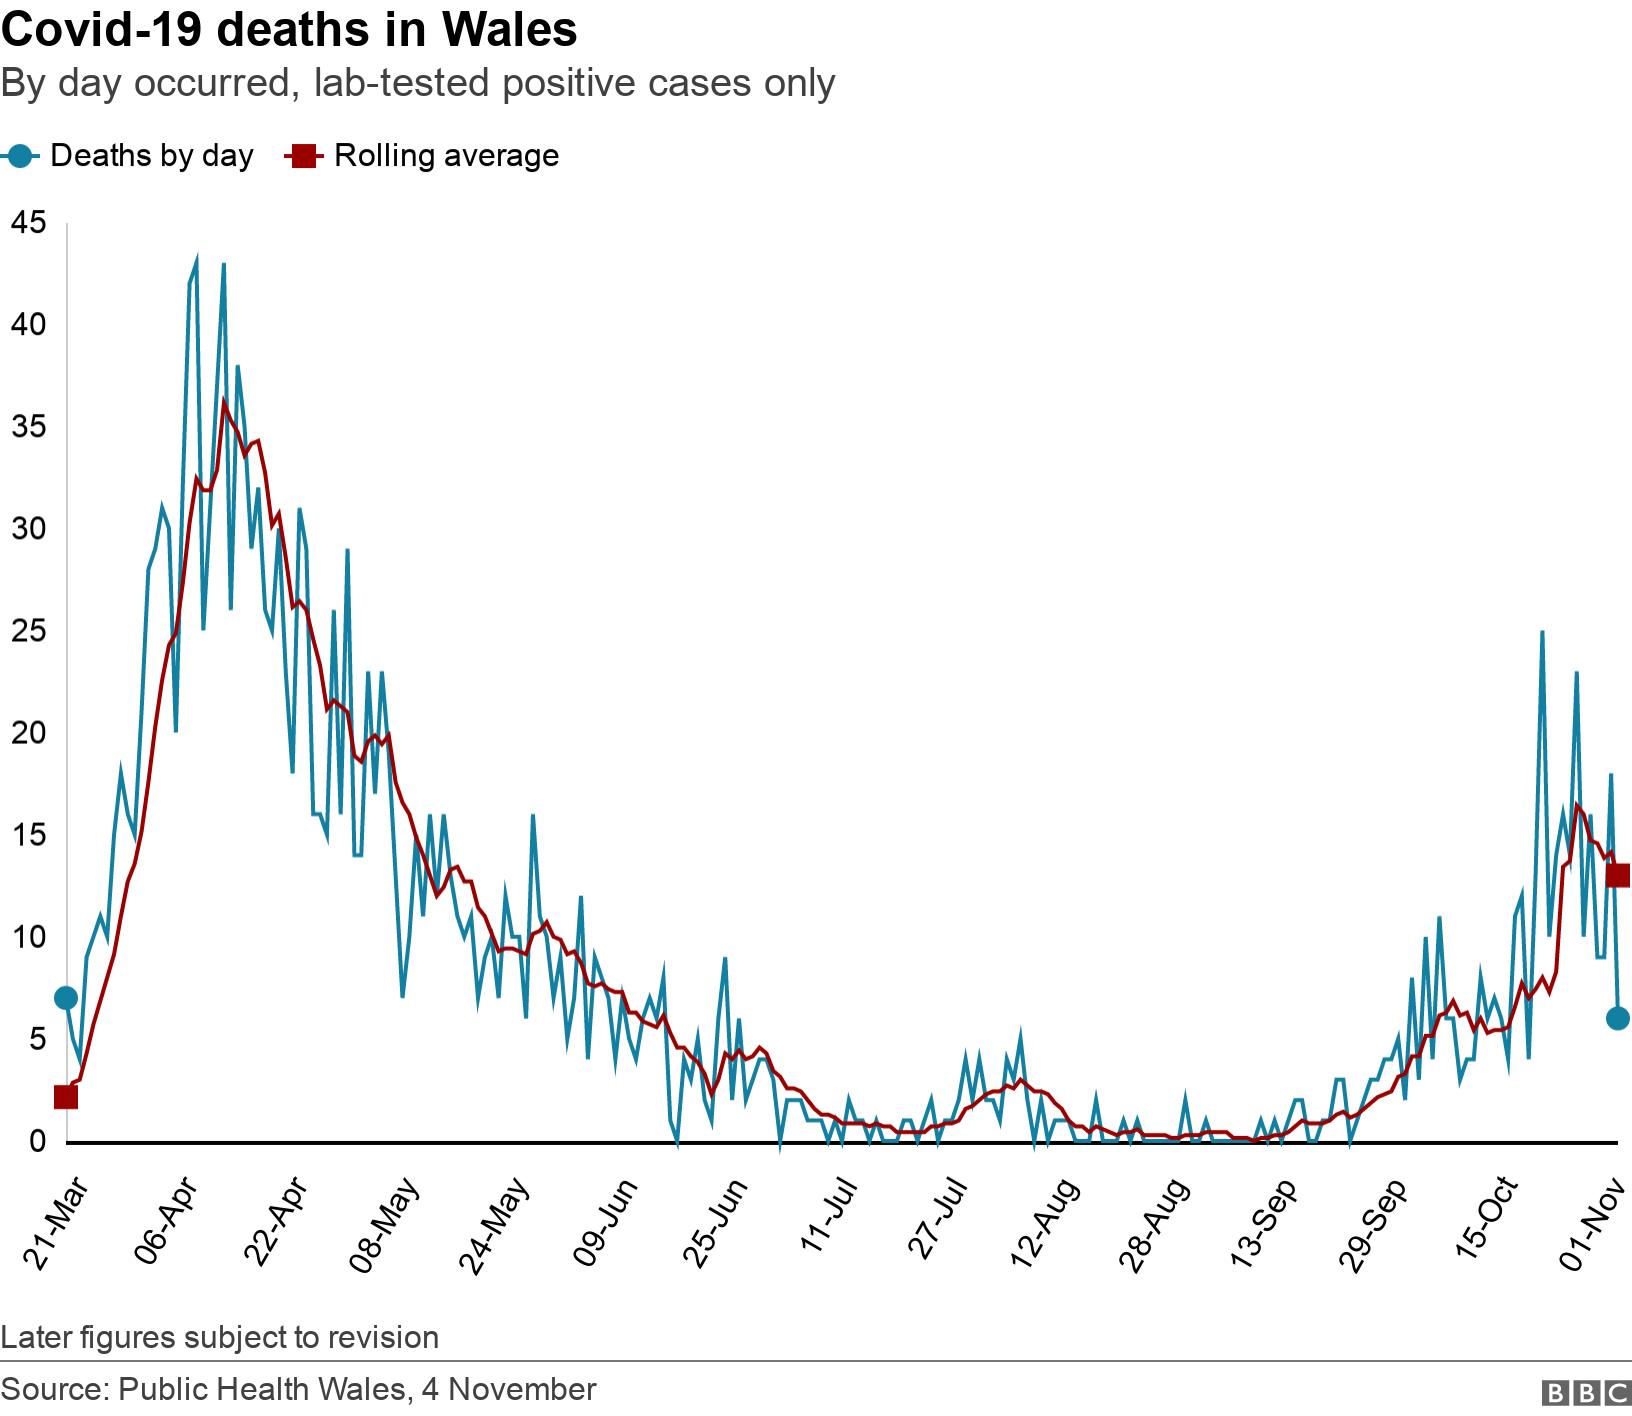 Covid-19 deaths in Wales. By day occurred, lab-tested positive cases only. Later figures subject to revision.